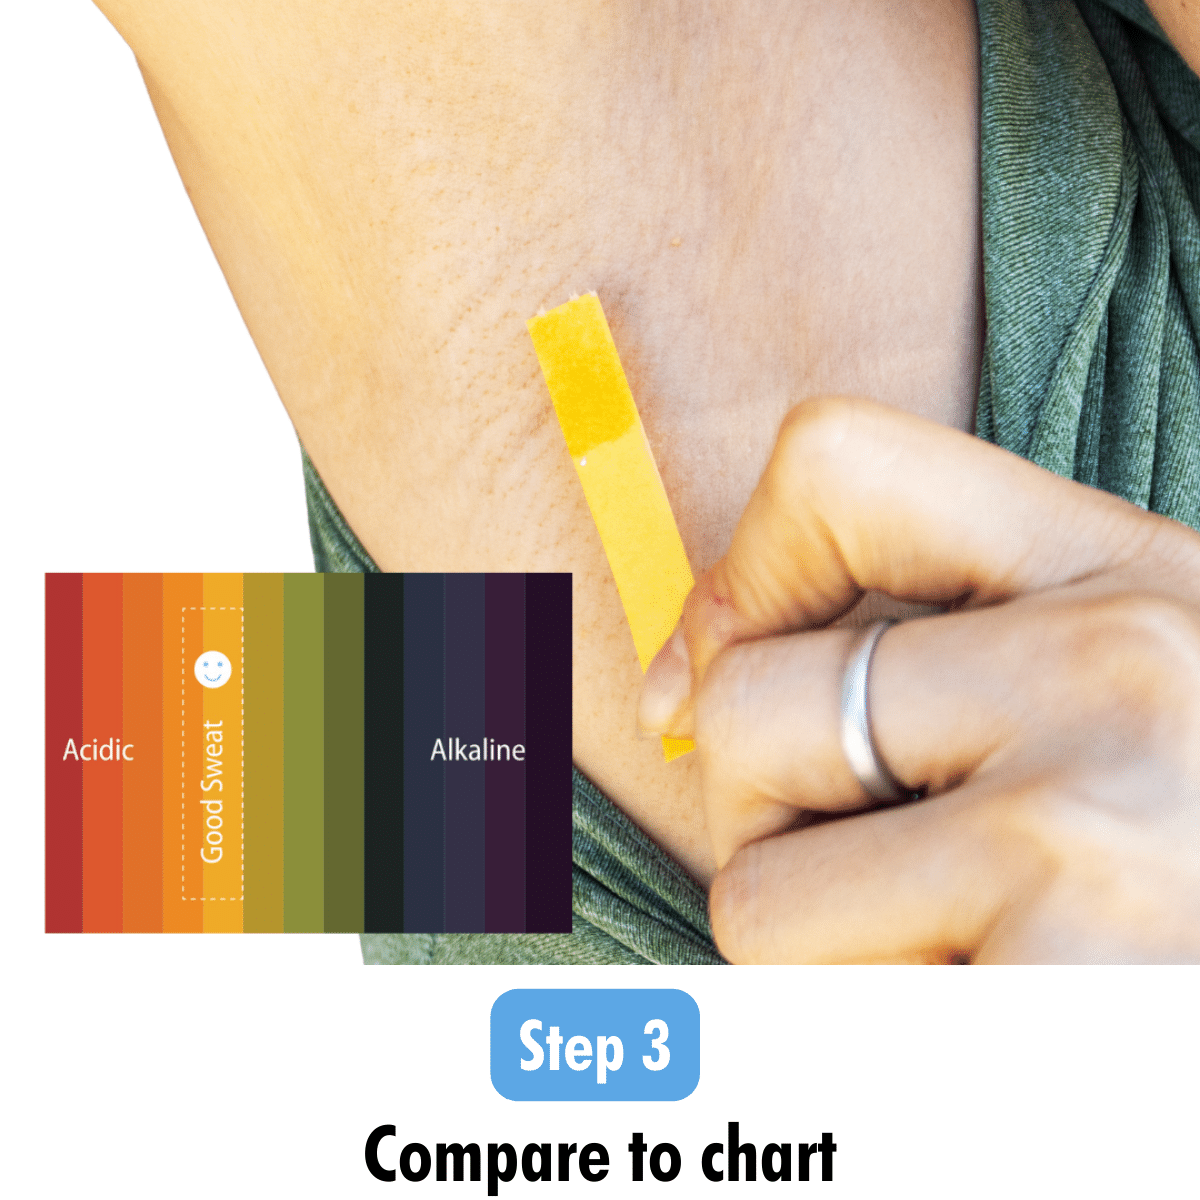 Step 3 of the Mirai Clinical sweat test process: Comparing collected sweat sample results against a reference chart, ensuring accurate understanding and detection of body odor concerns.